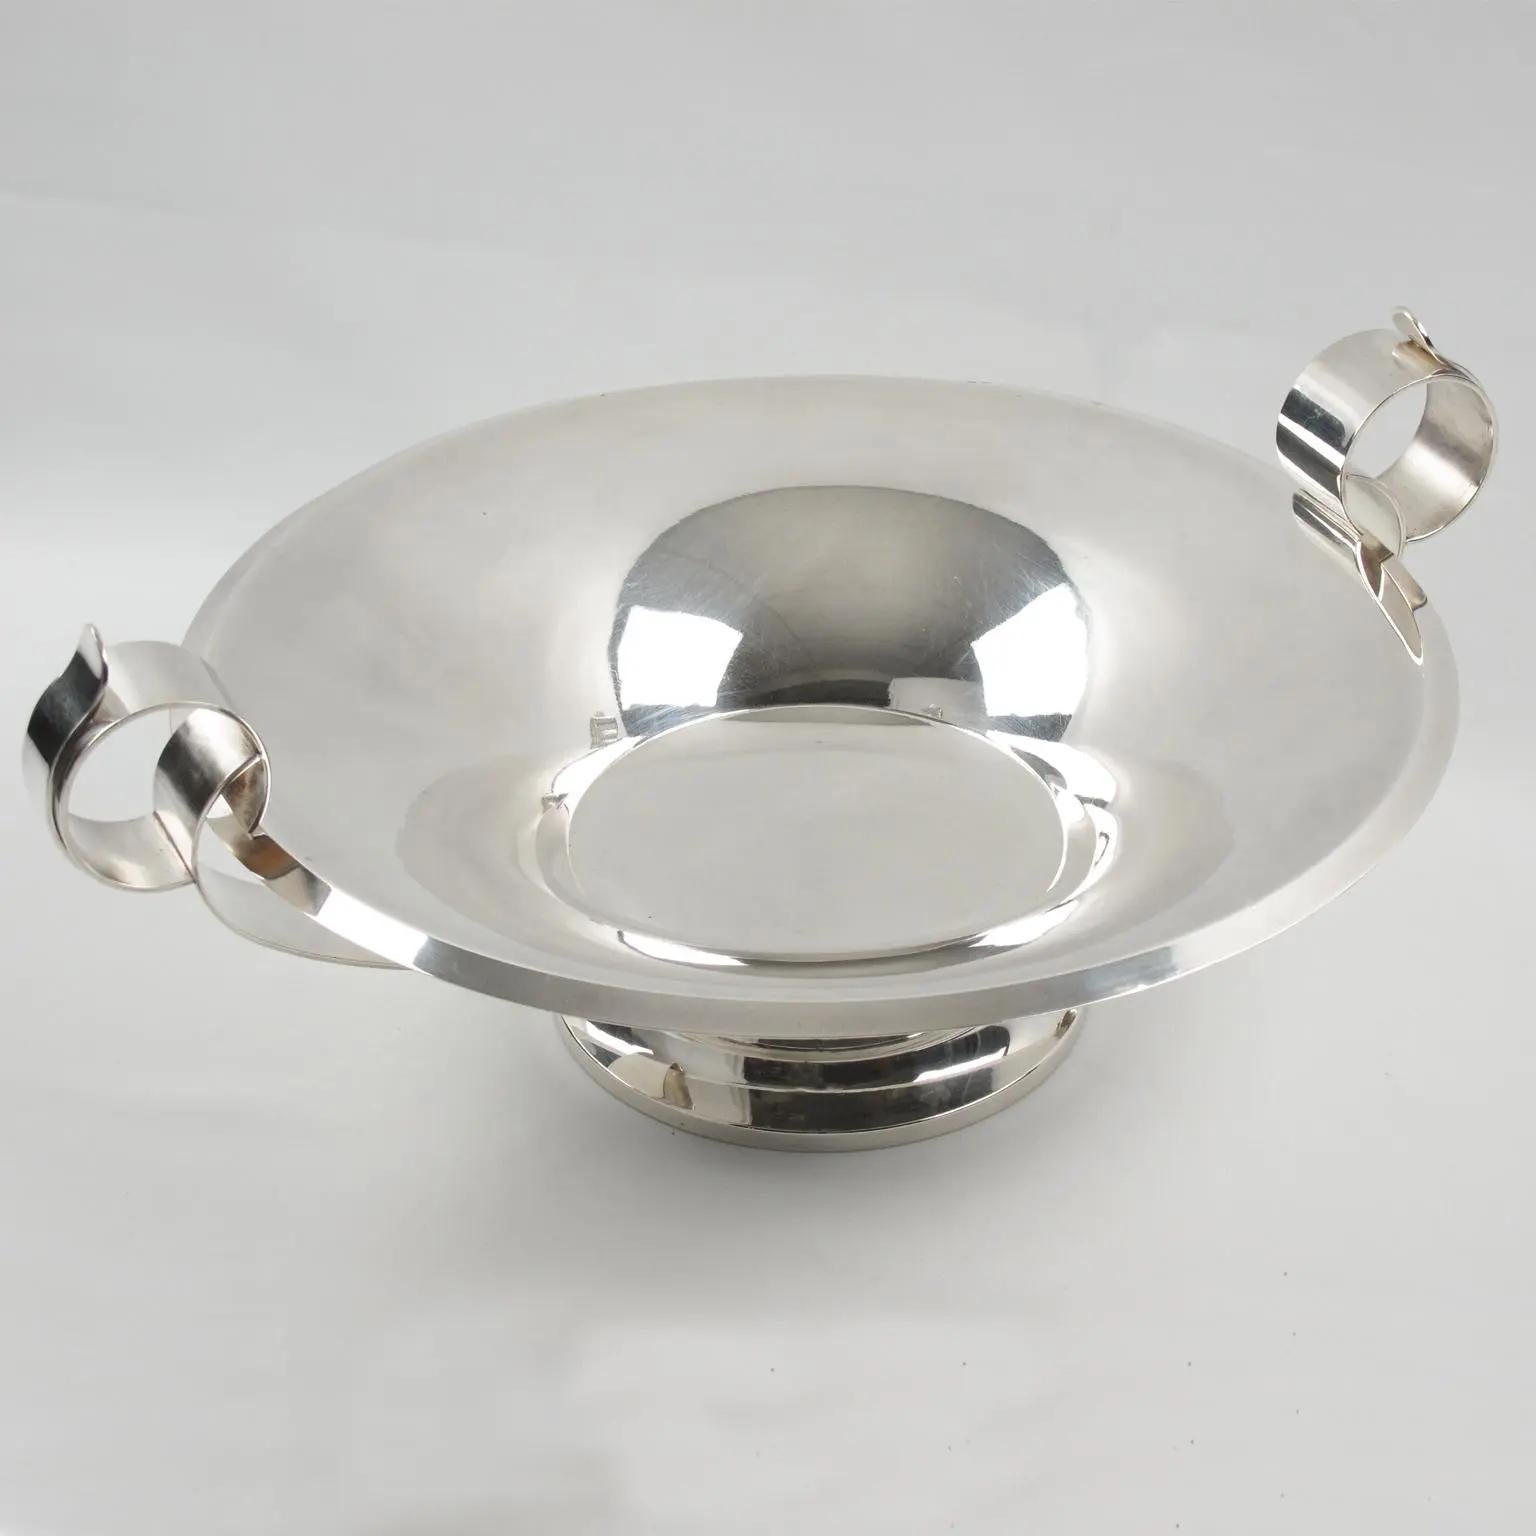 This elegant Art Deco polished silver plate pedestal bowl, centerpiece, or serving bowl was designed by Silversmith Francois Frionnet, Paris, in the 1930s. The modernist design with a round stepped bottom boasts a funnel-shaped dish with a flat base